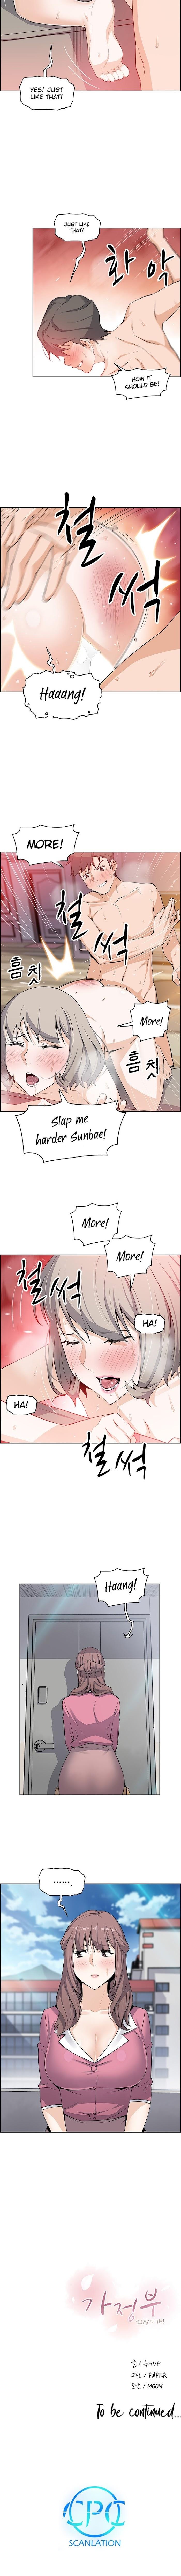 Housekeeper [Neck Pillow, Paper] Ch.49/49 [English] [Manhwa PDF] Completed 192